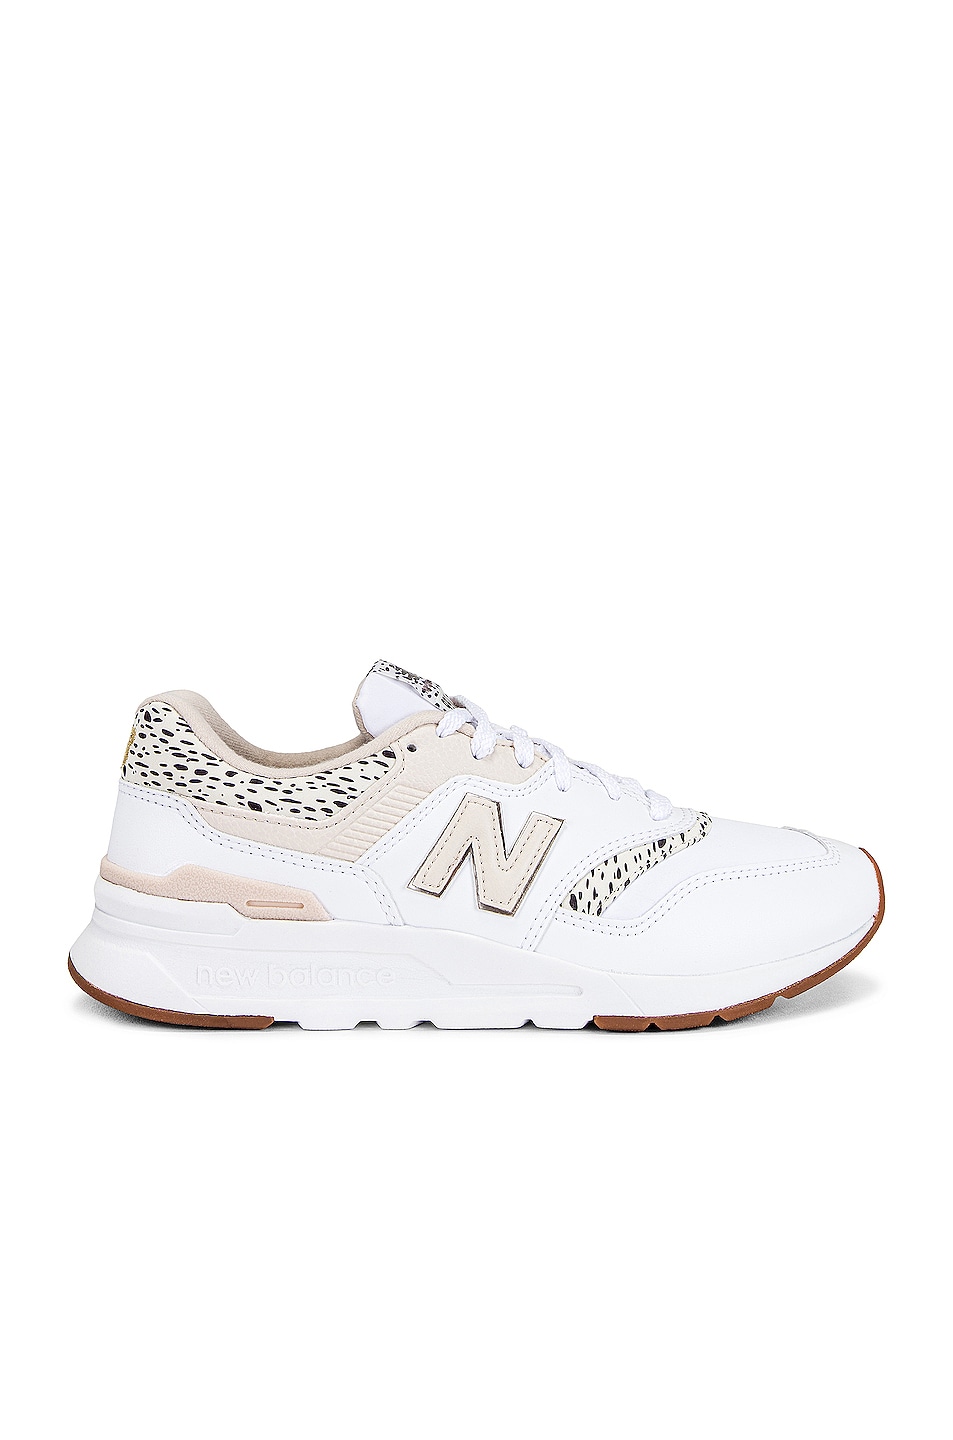 Image 1 of New Balance 997 Sneakers in White & Calm Taupe